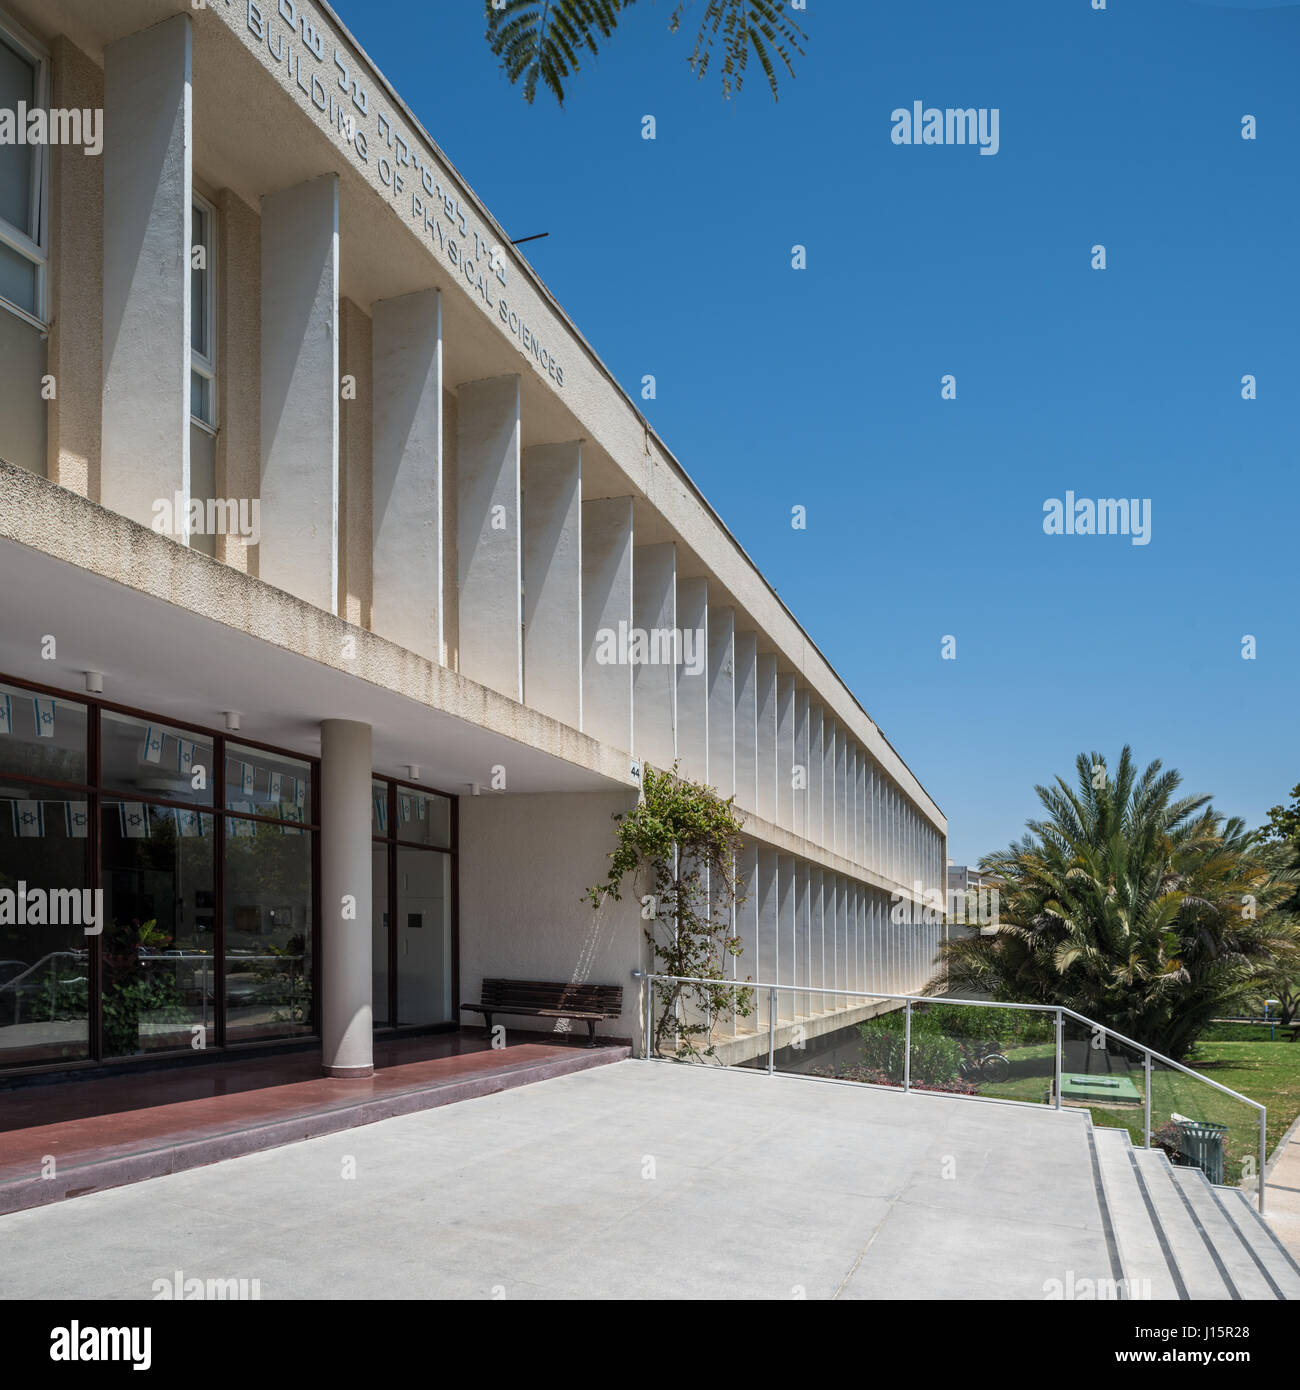 Weizmann institute of science - april 18th 2017, Rehovot, Israel Stock Photo